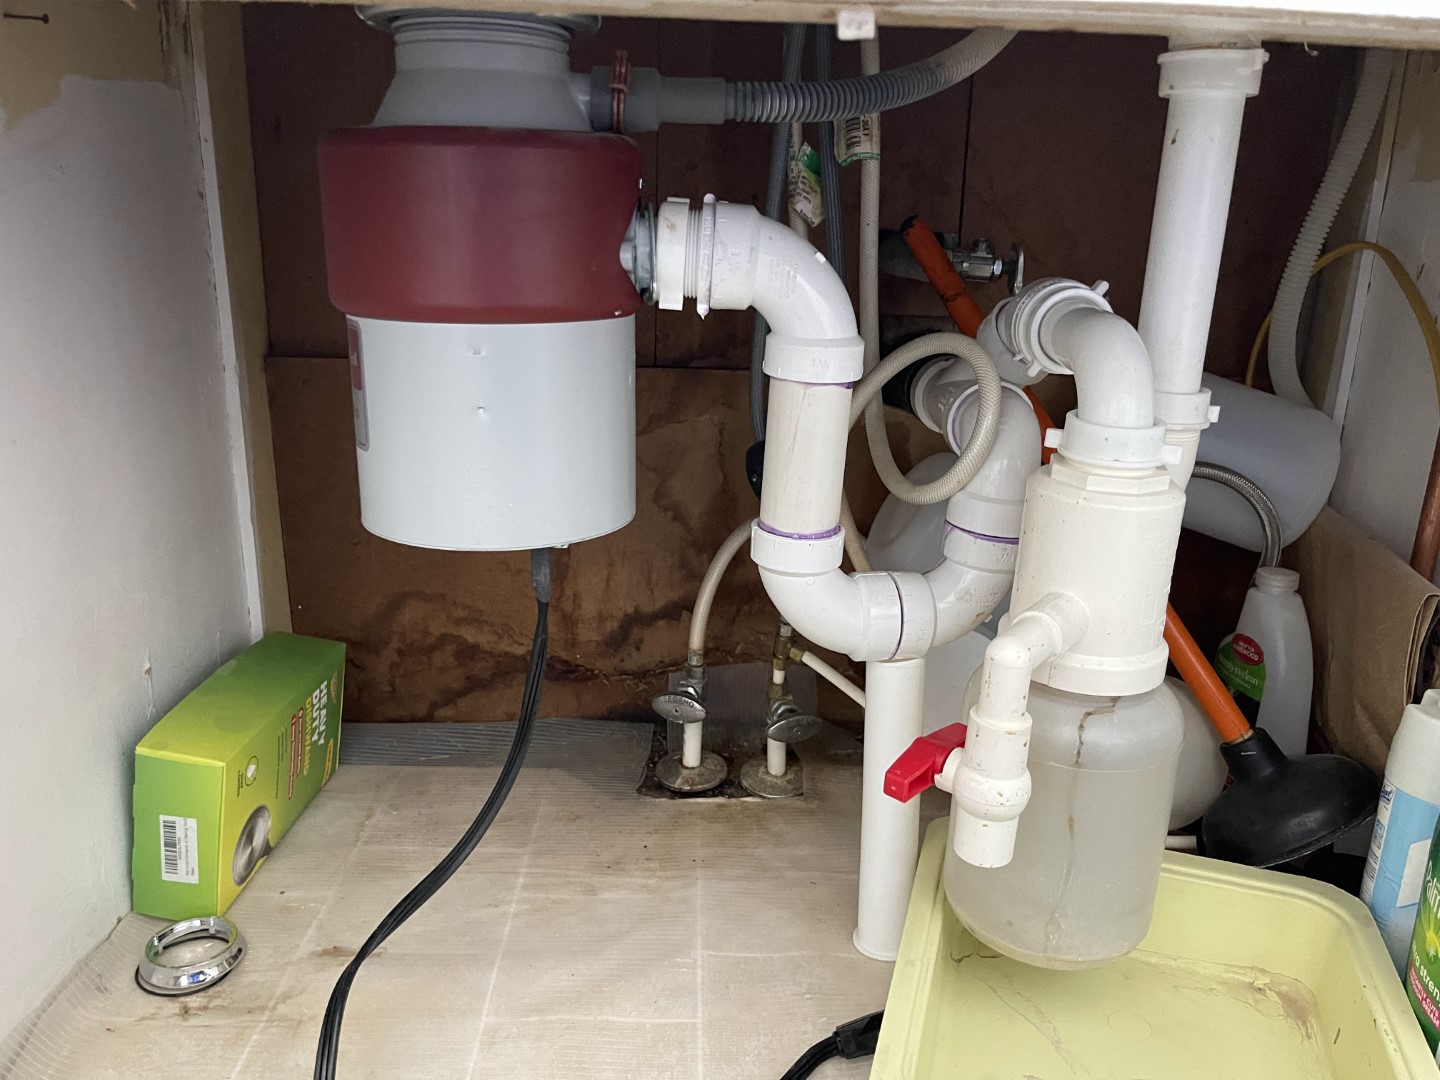 Garbage disposal replacement and installation in Shelby Township Michigan by Mad Dad Handyman